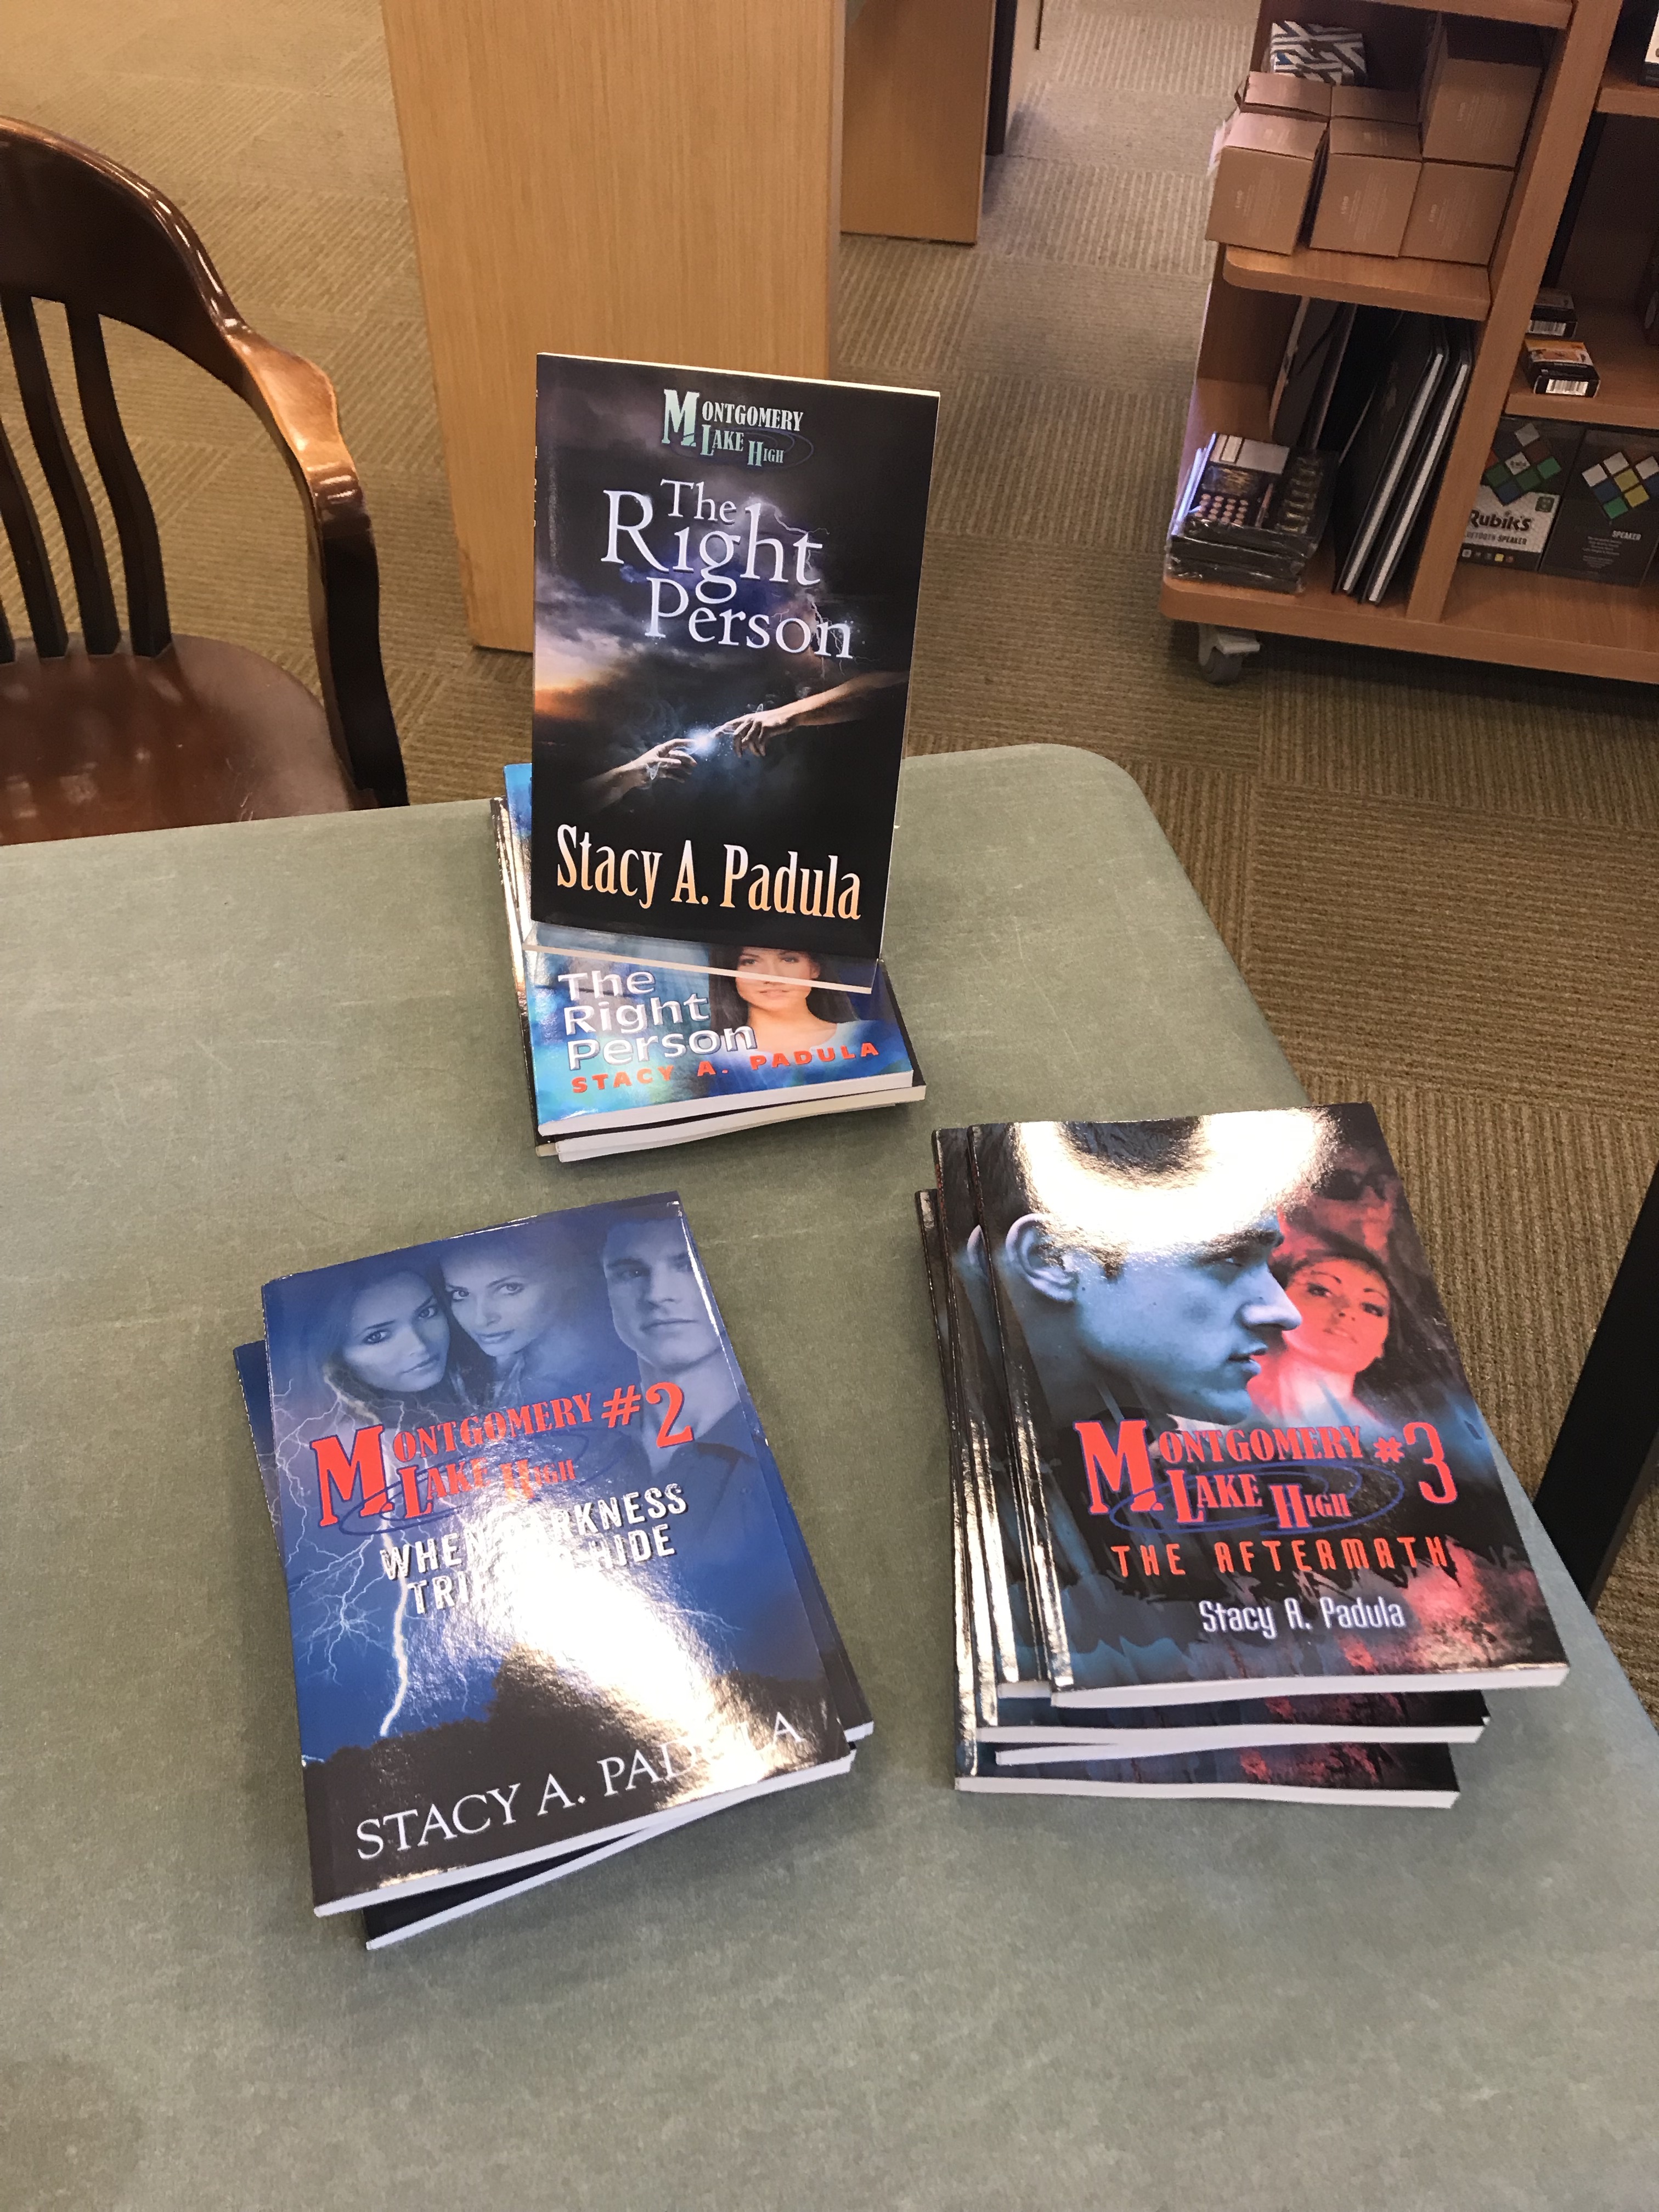 In the News – Books by Stacy A. Padula